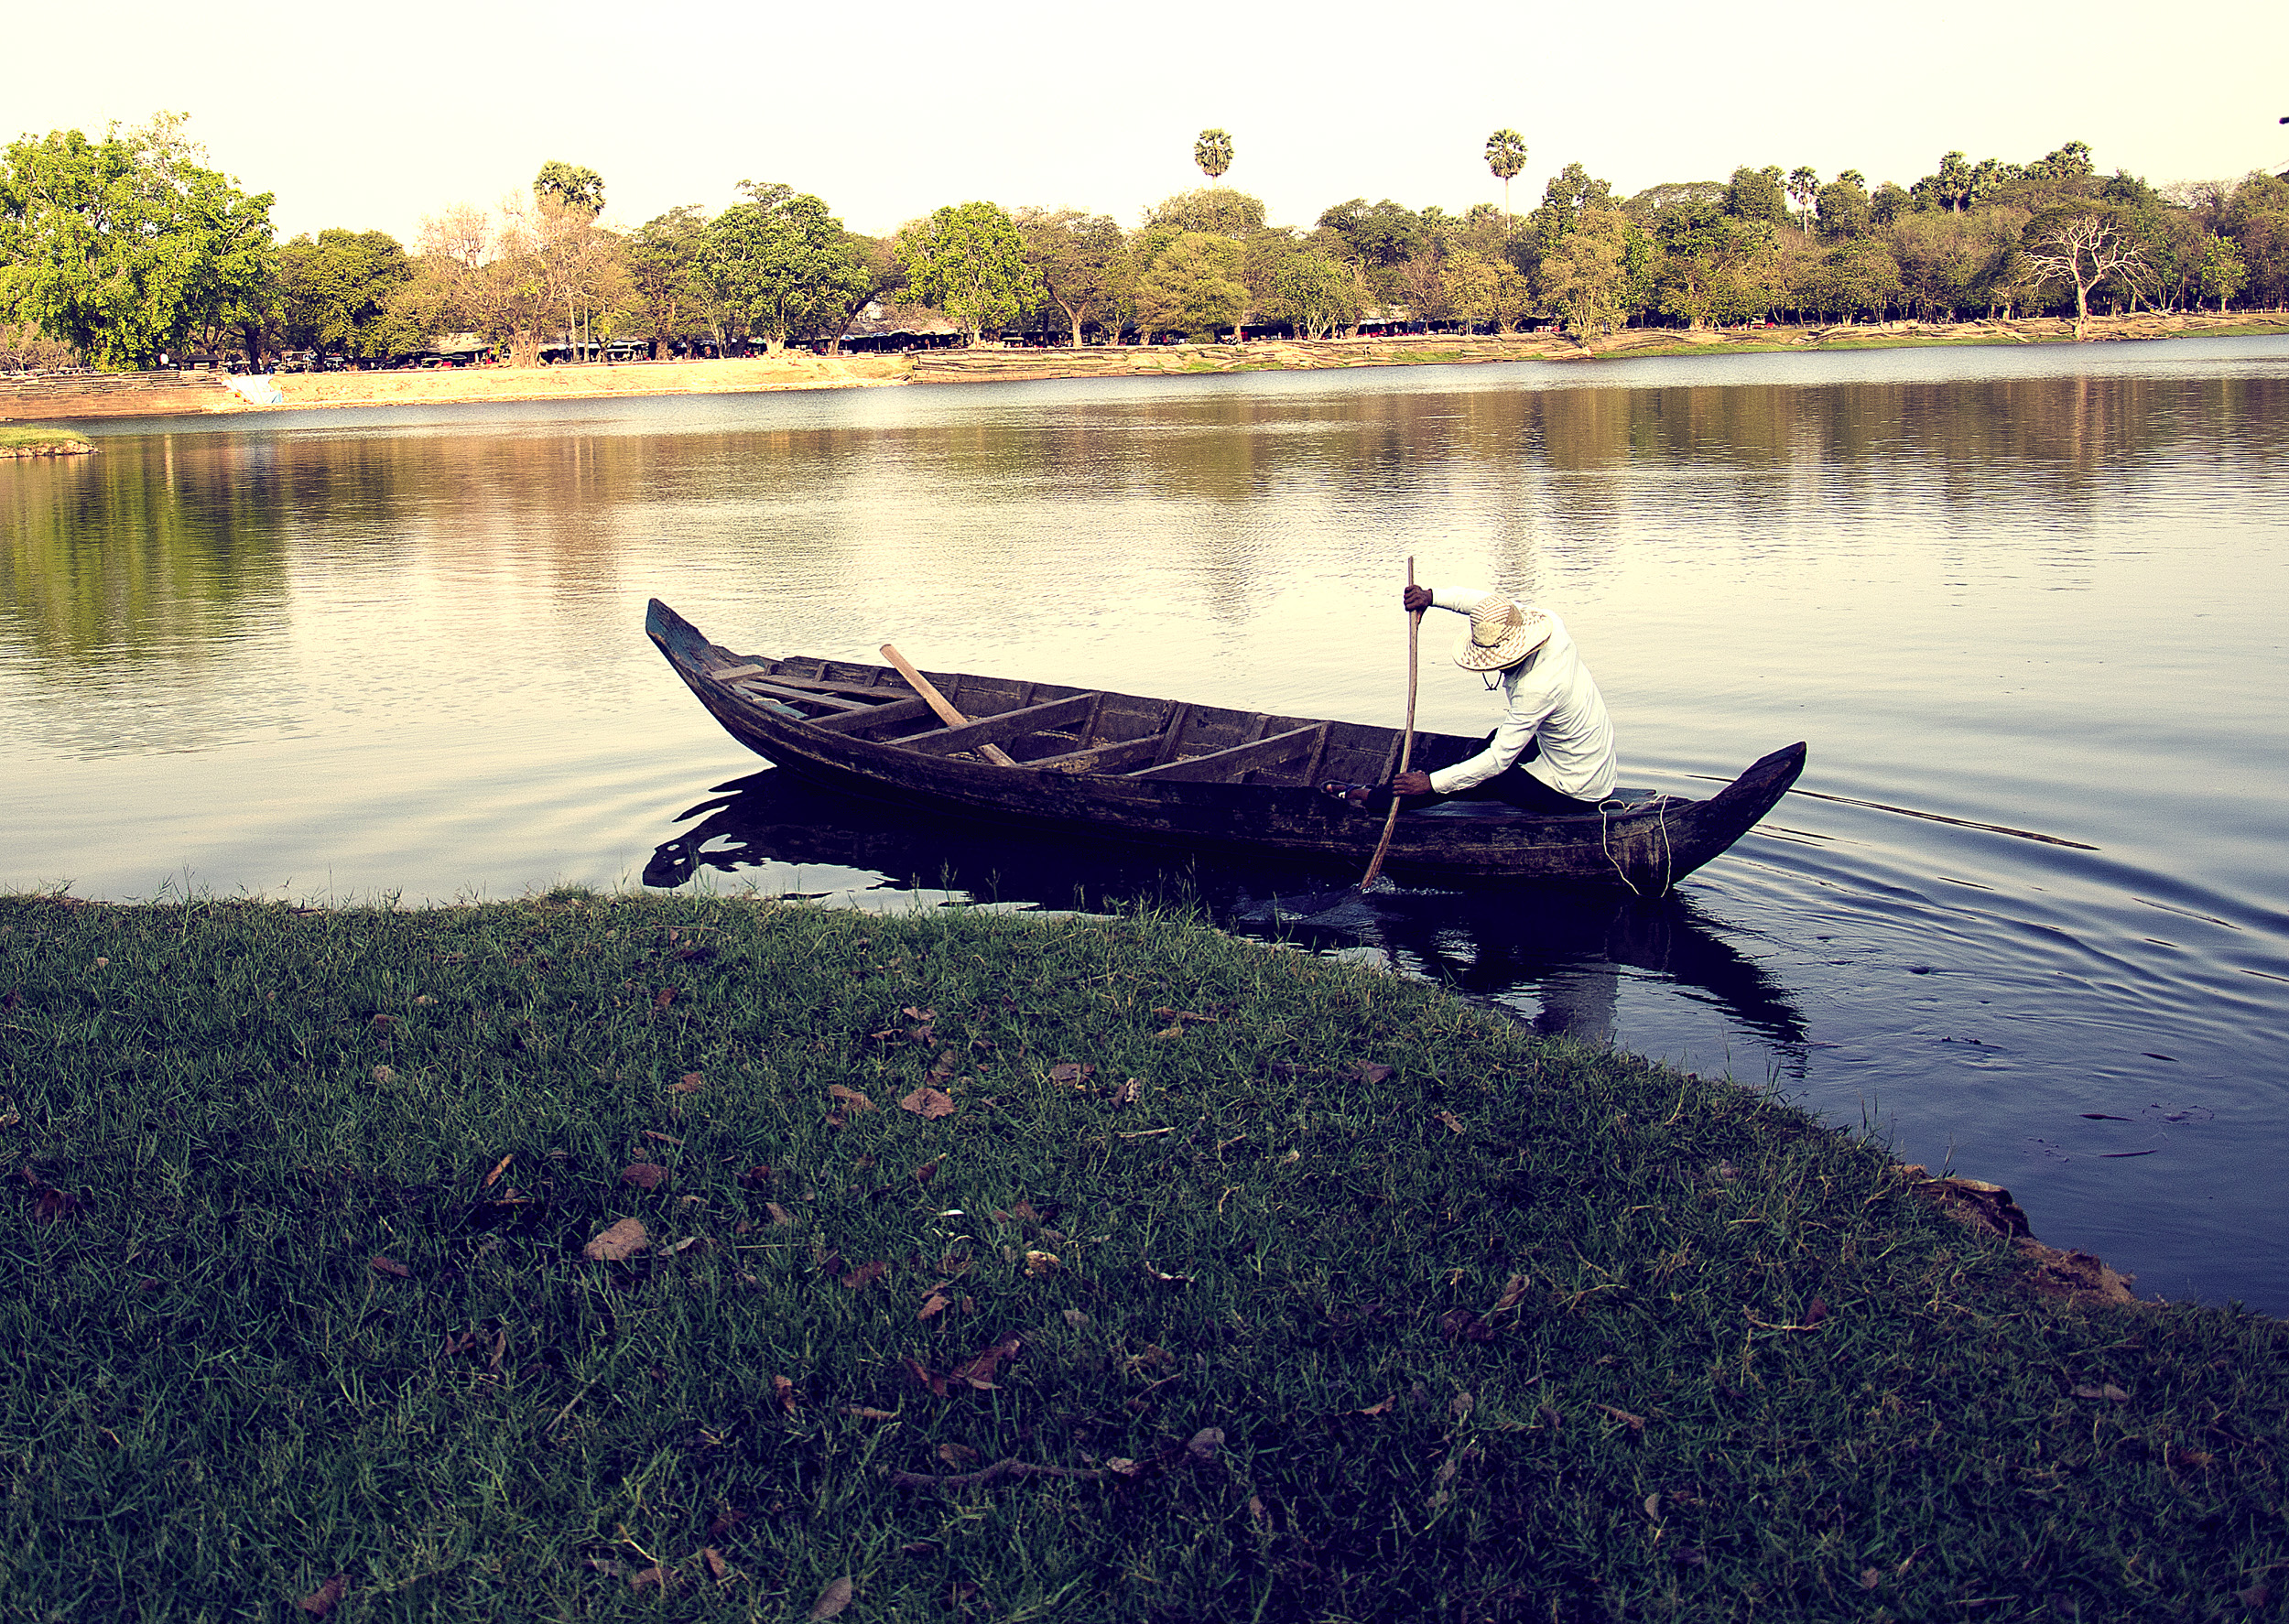 Dugout Canoe being paddled across the moat at Angkor.